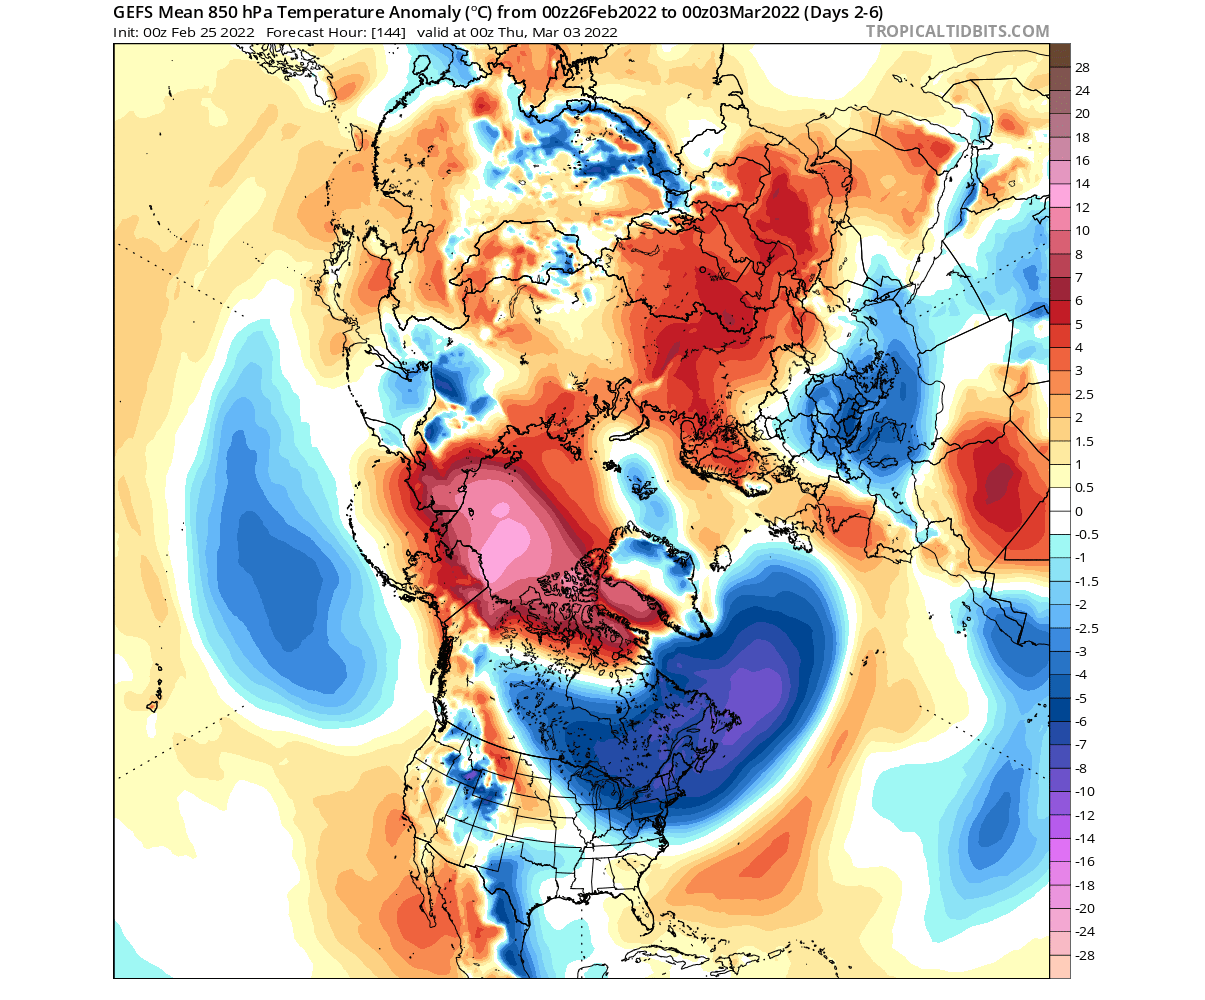 spring-weather-forecast-polar-vortex-march-2022-united-states-temperature-anomaly-early-month-cold-pattern